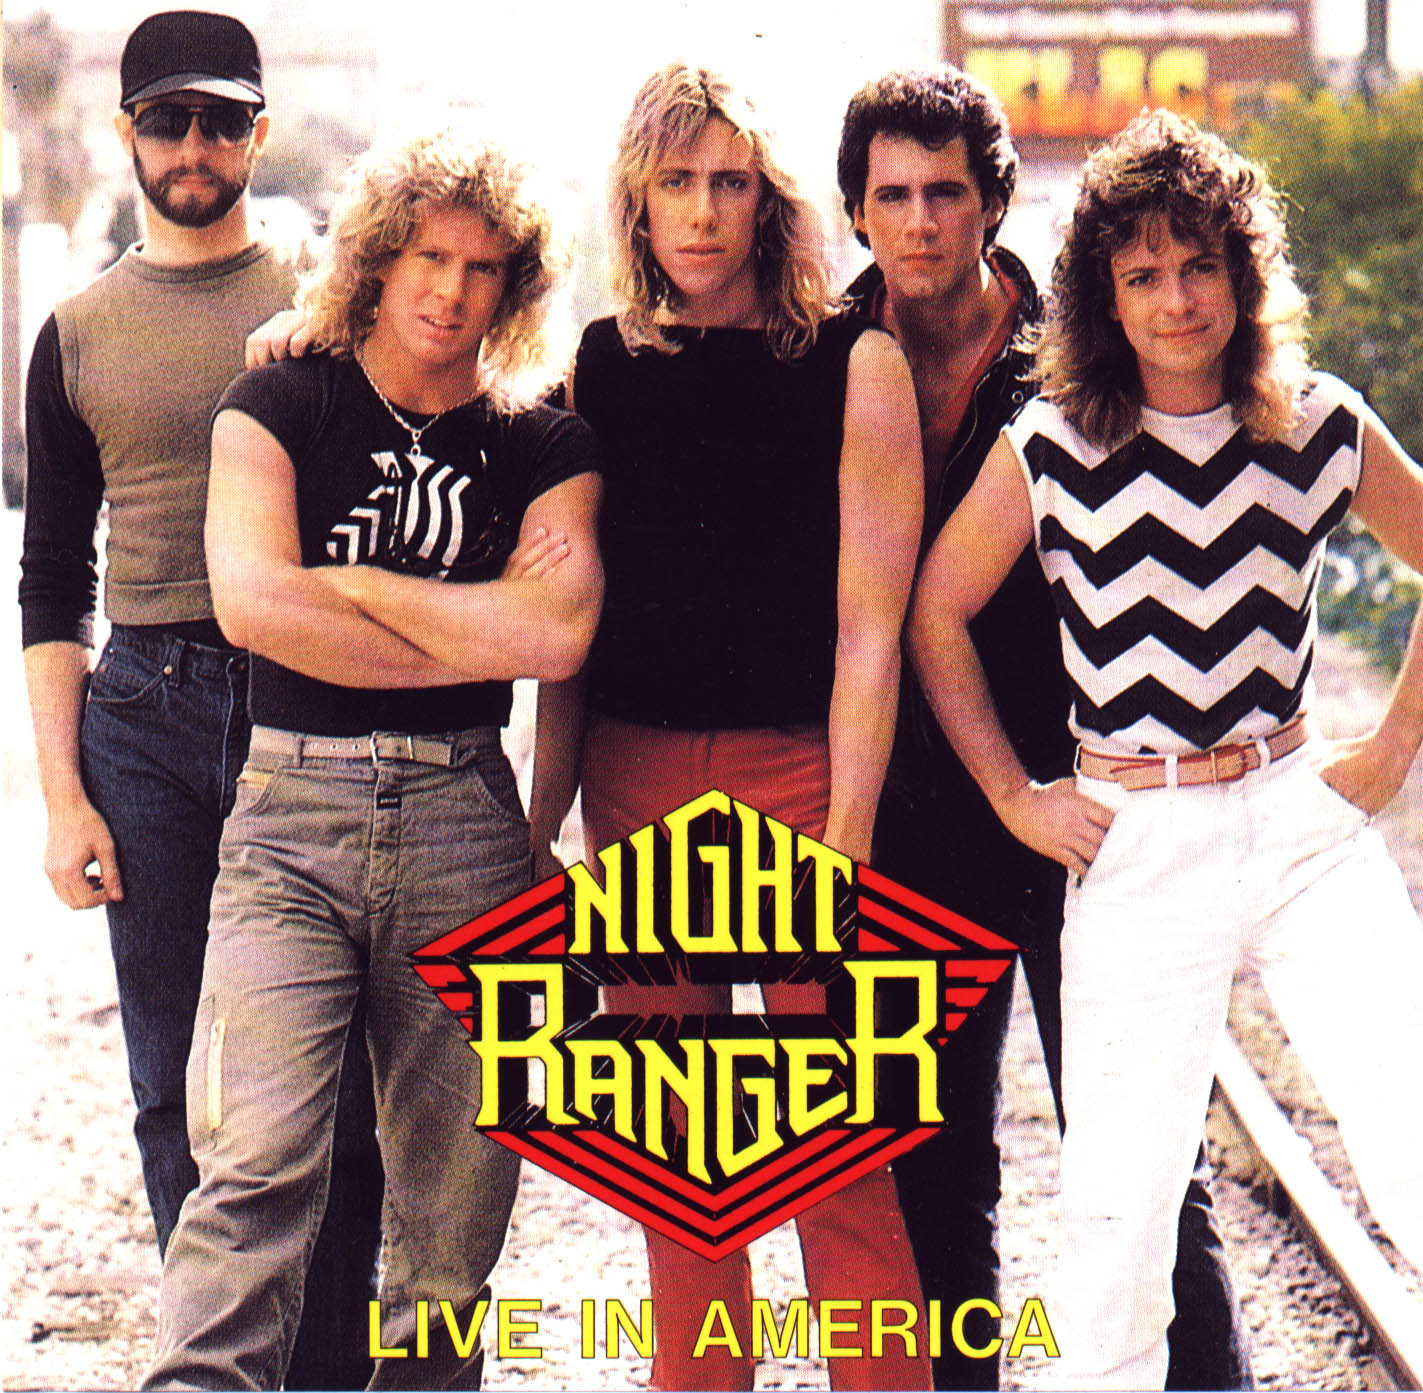 who did night ranger tour with in 1984